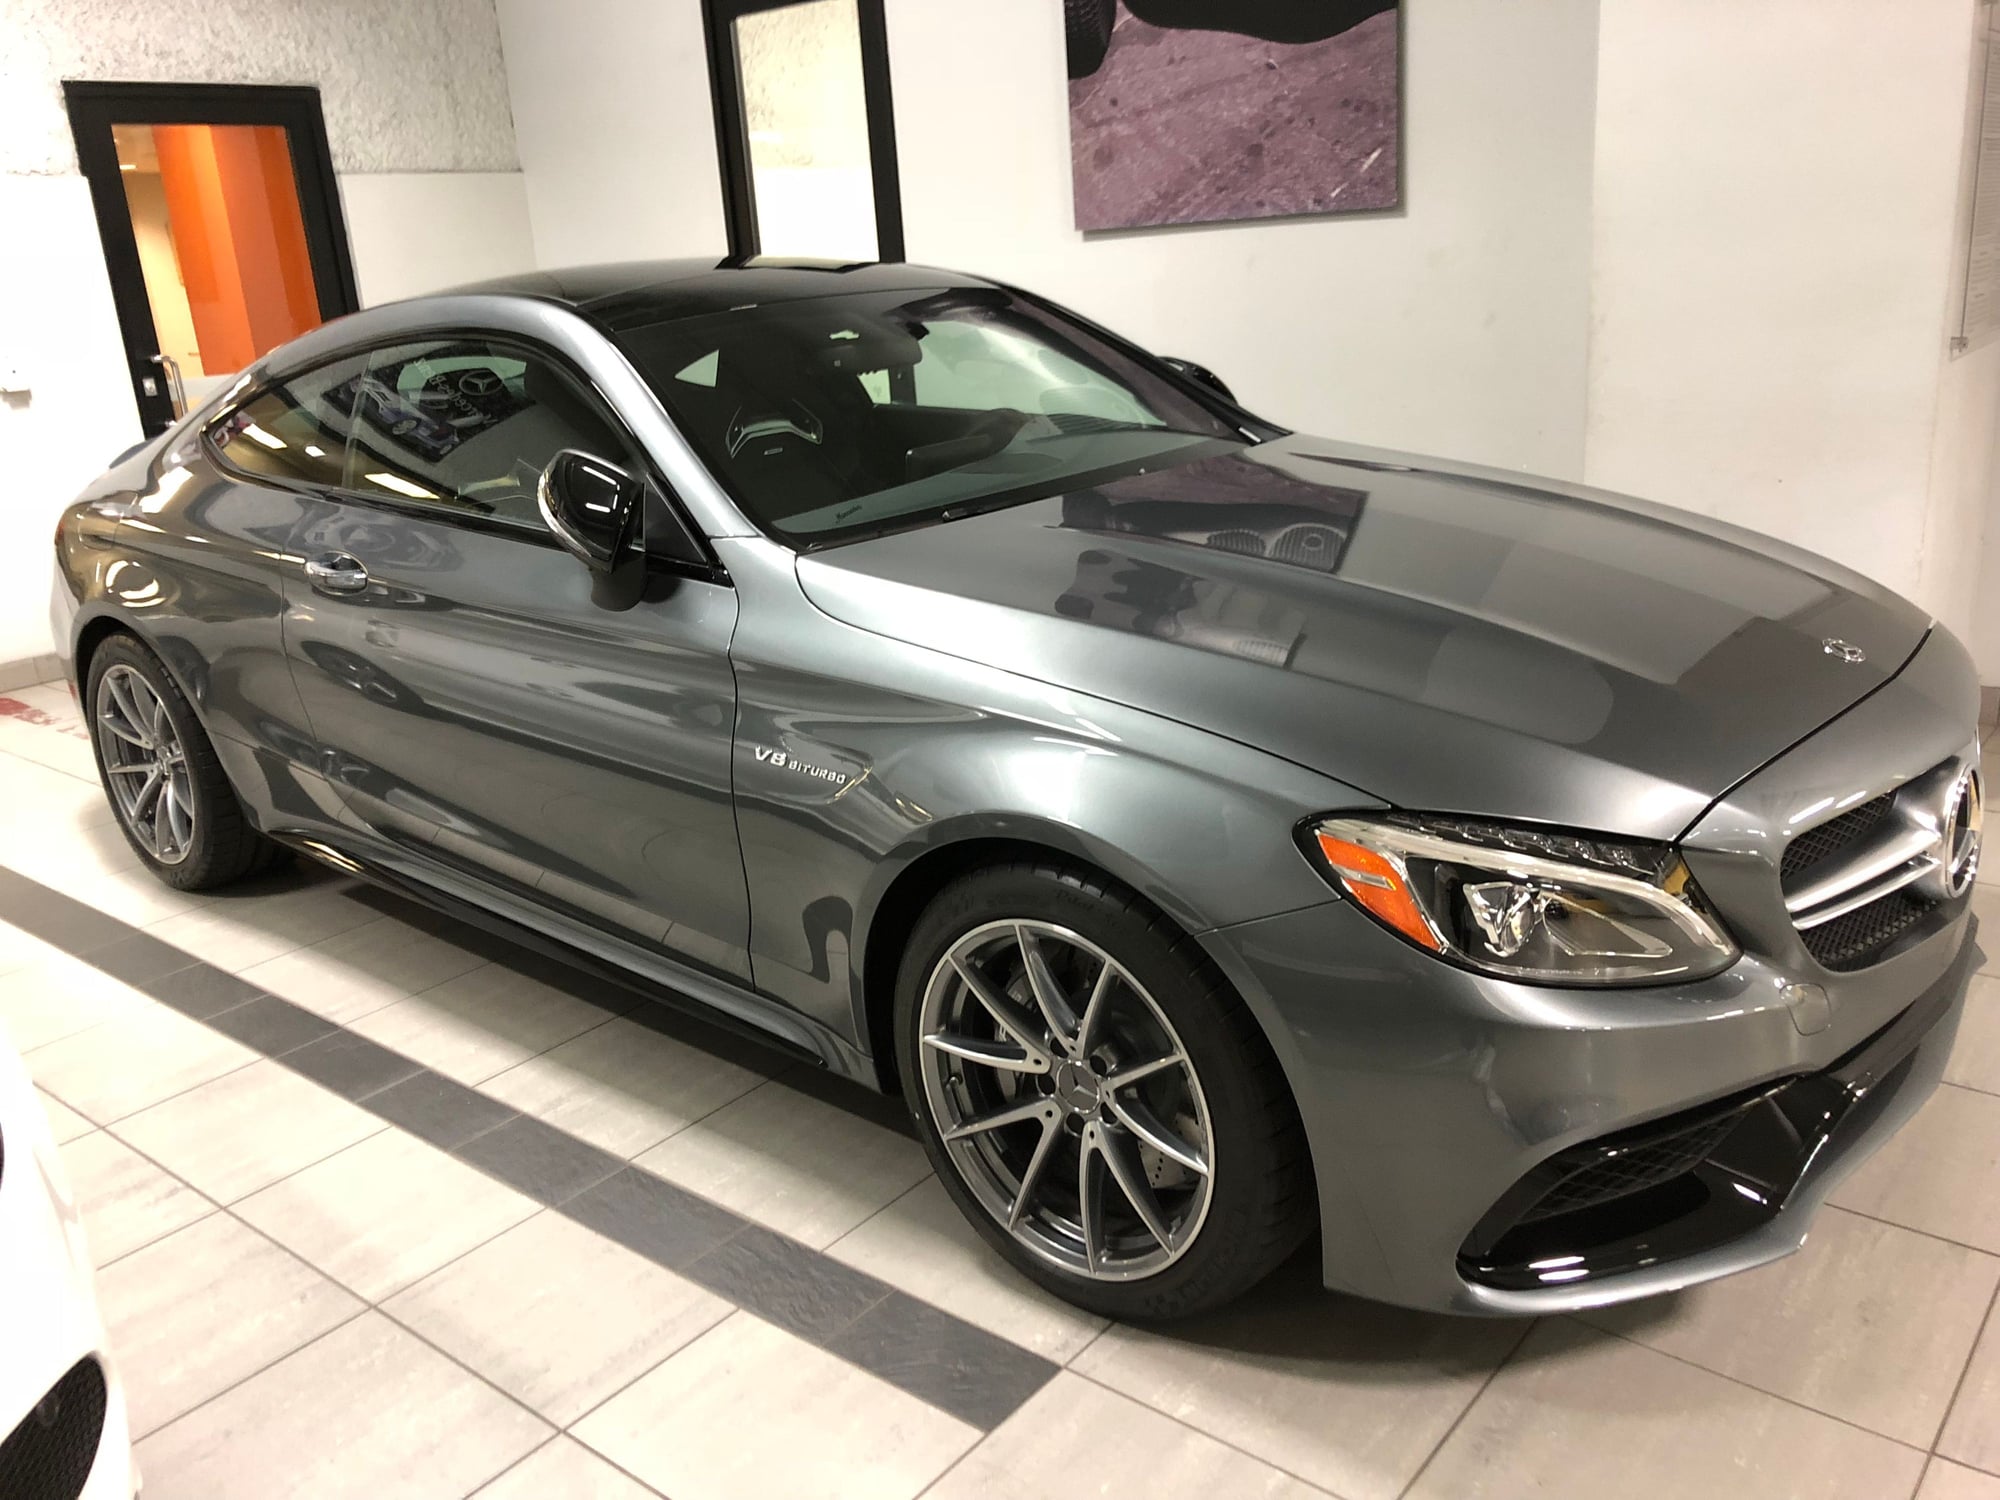 2018 Mercedes-Benz C63 AMG - 2018 Mercedes C63 AMG coupe w/ prepaid service and more - Used - VIN WDDWJ8GB9JF633520 - 7,480 Miles - 8 cyl - 2WD - Automatic - Coupe - Gray - Woodland Hills, CA 91367, United States